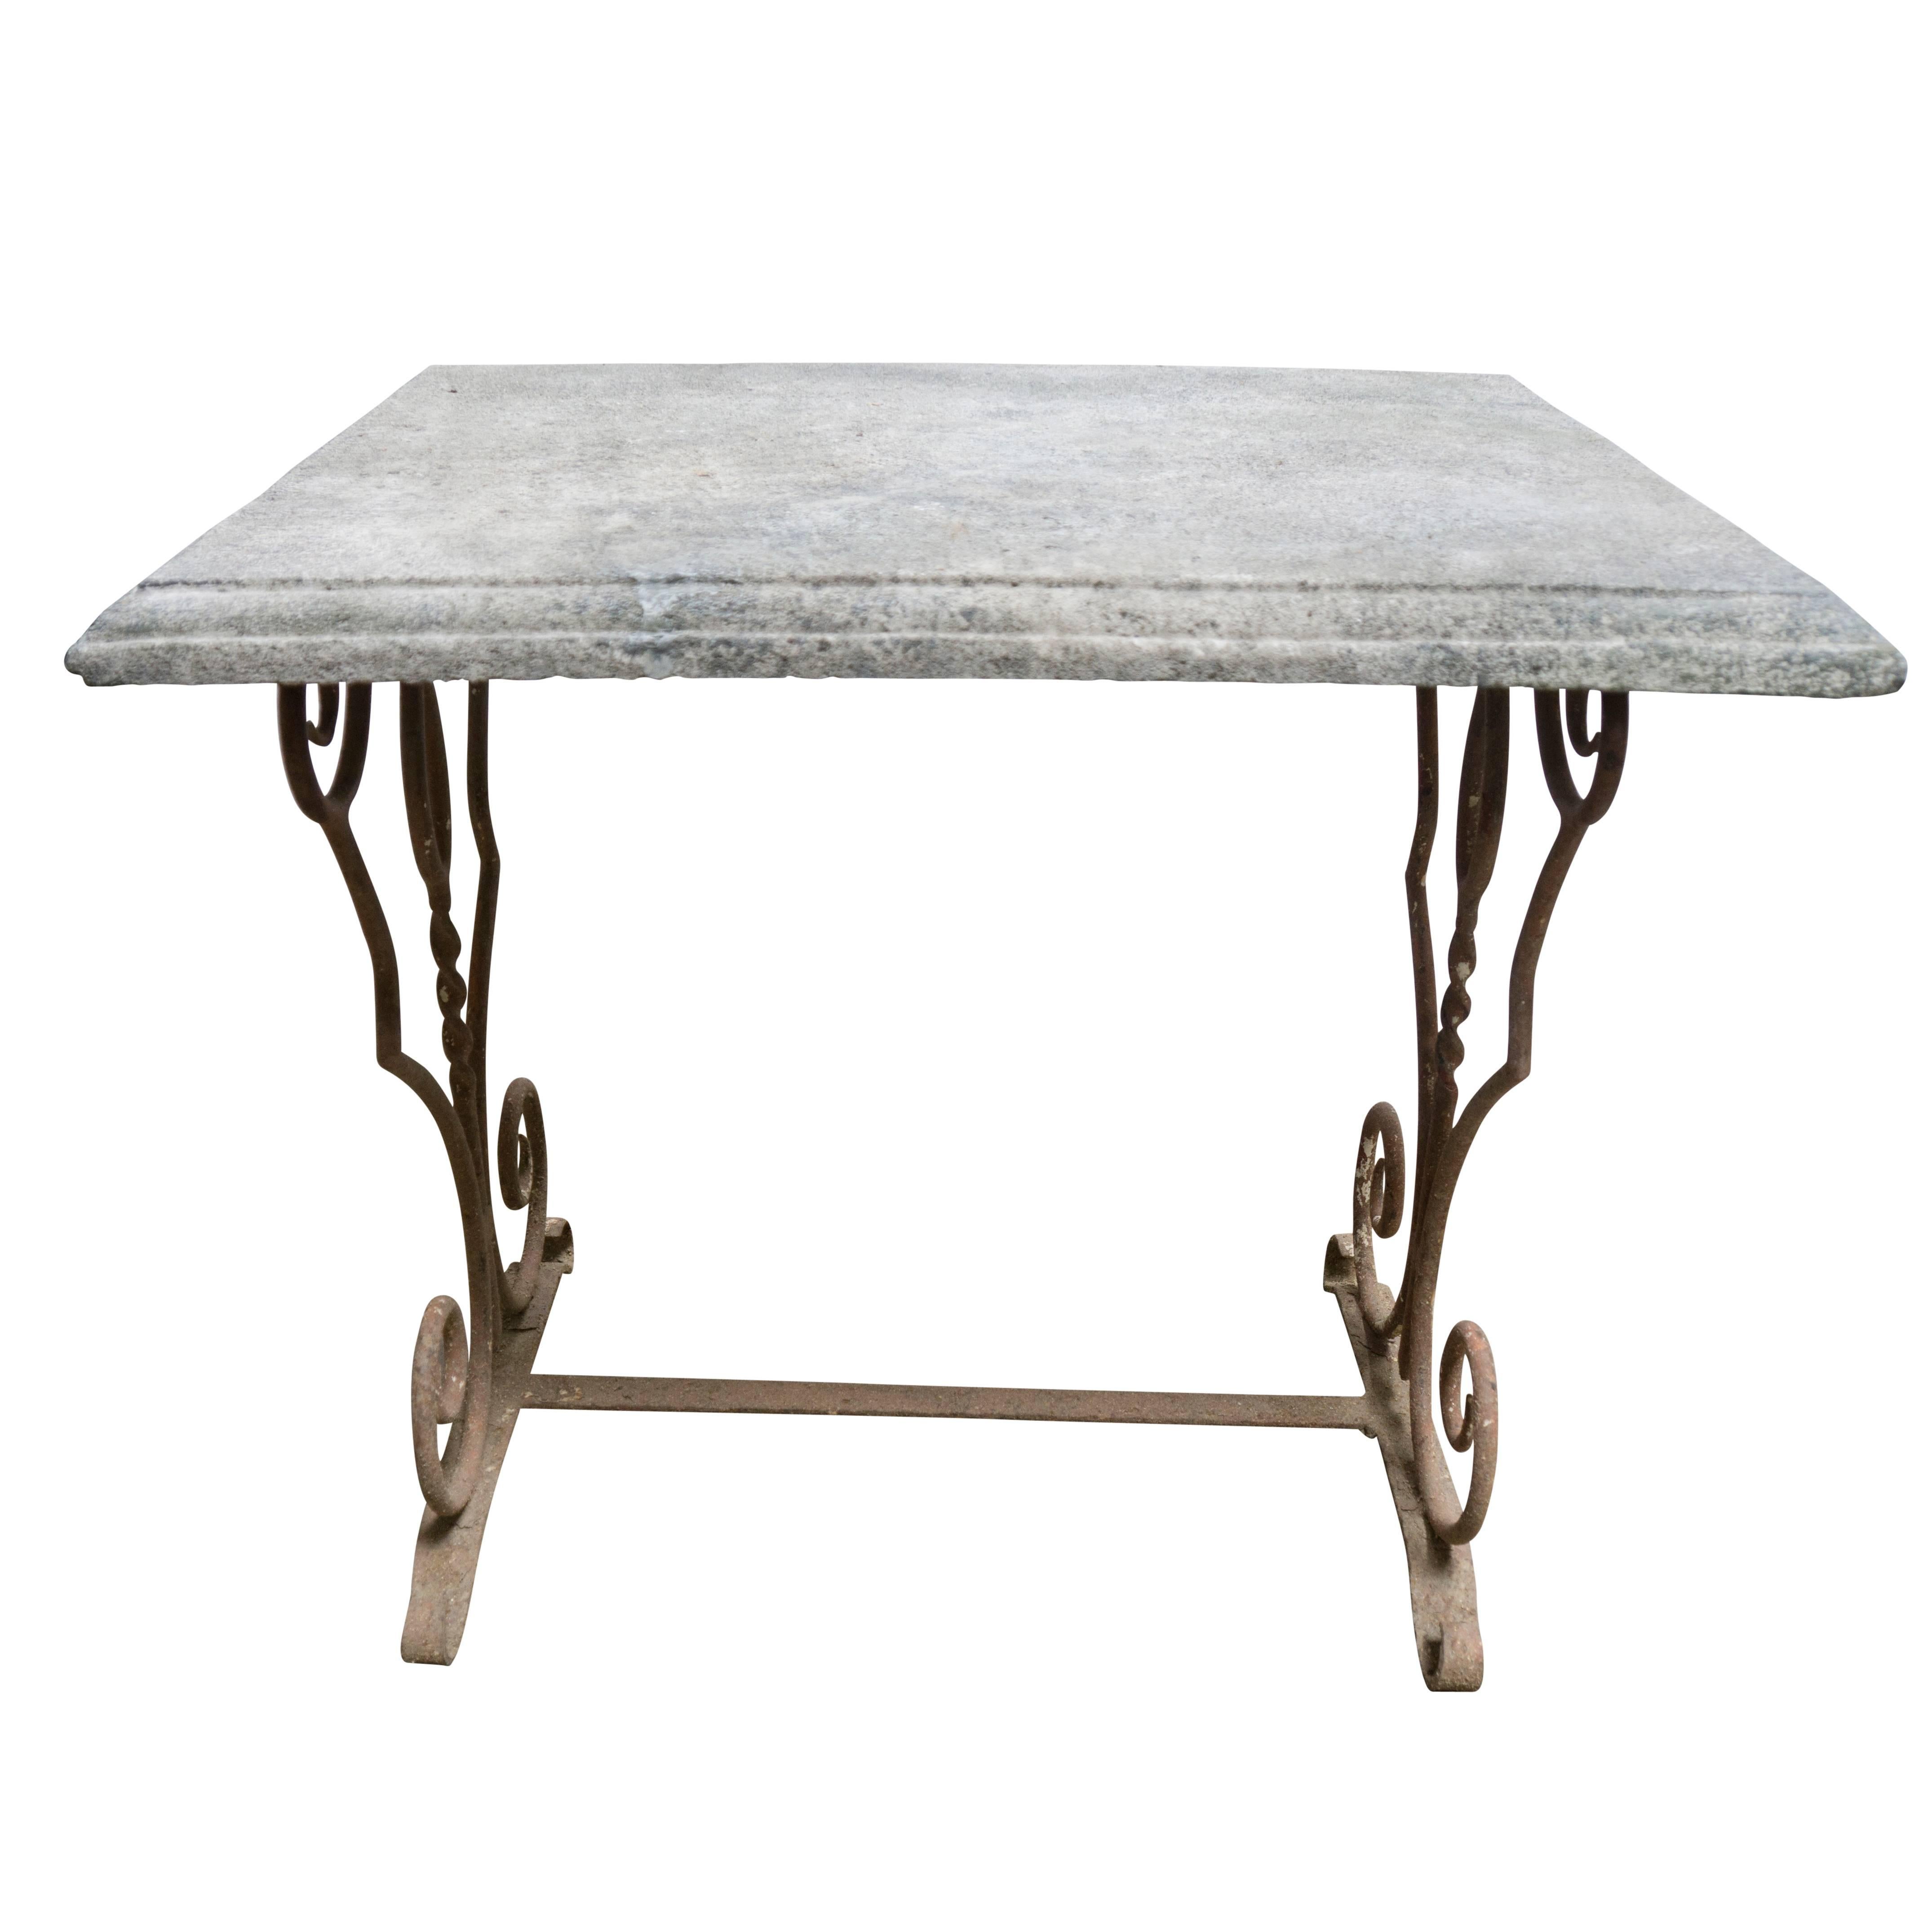 An end table size antique that is better used out in the open. The limestone top is porous, contains a nice blend of grey minerals, and has been handcrafted with a three step curved edge. The iron base is decorated in a simple four spiral fashion